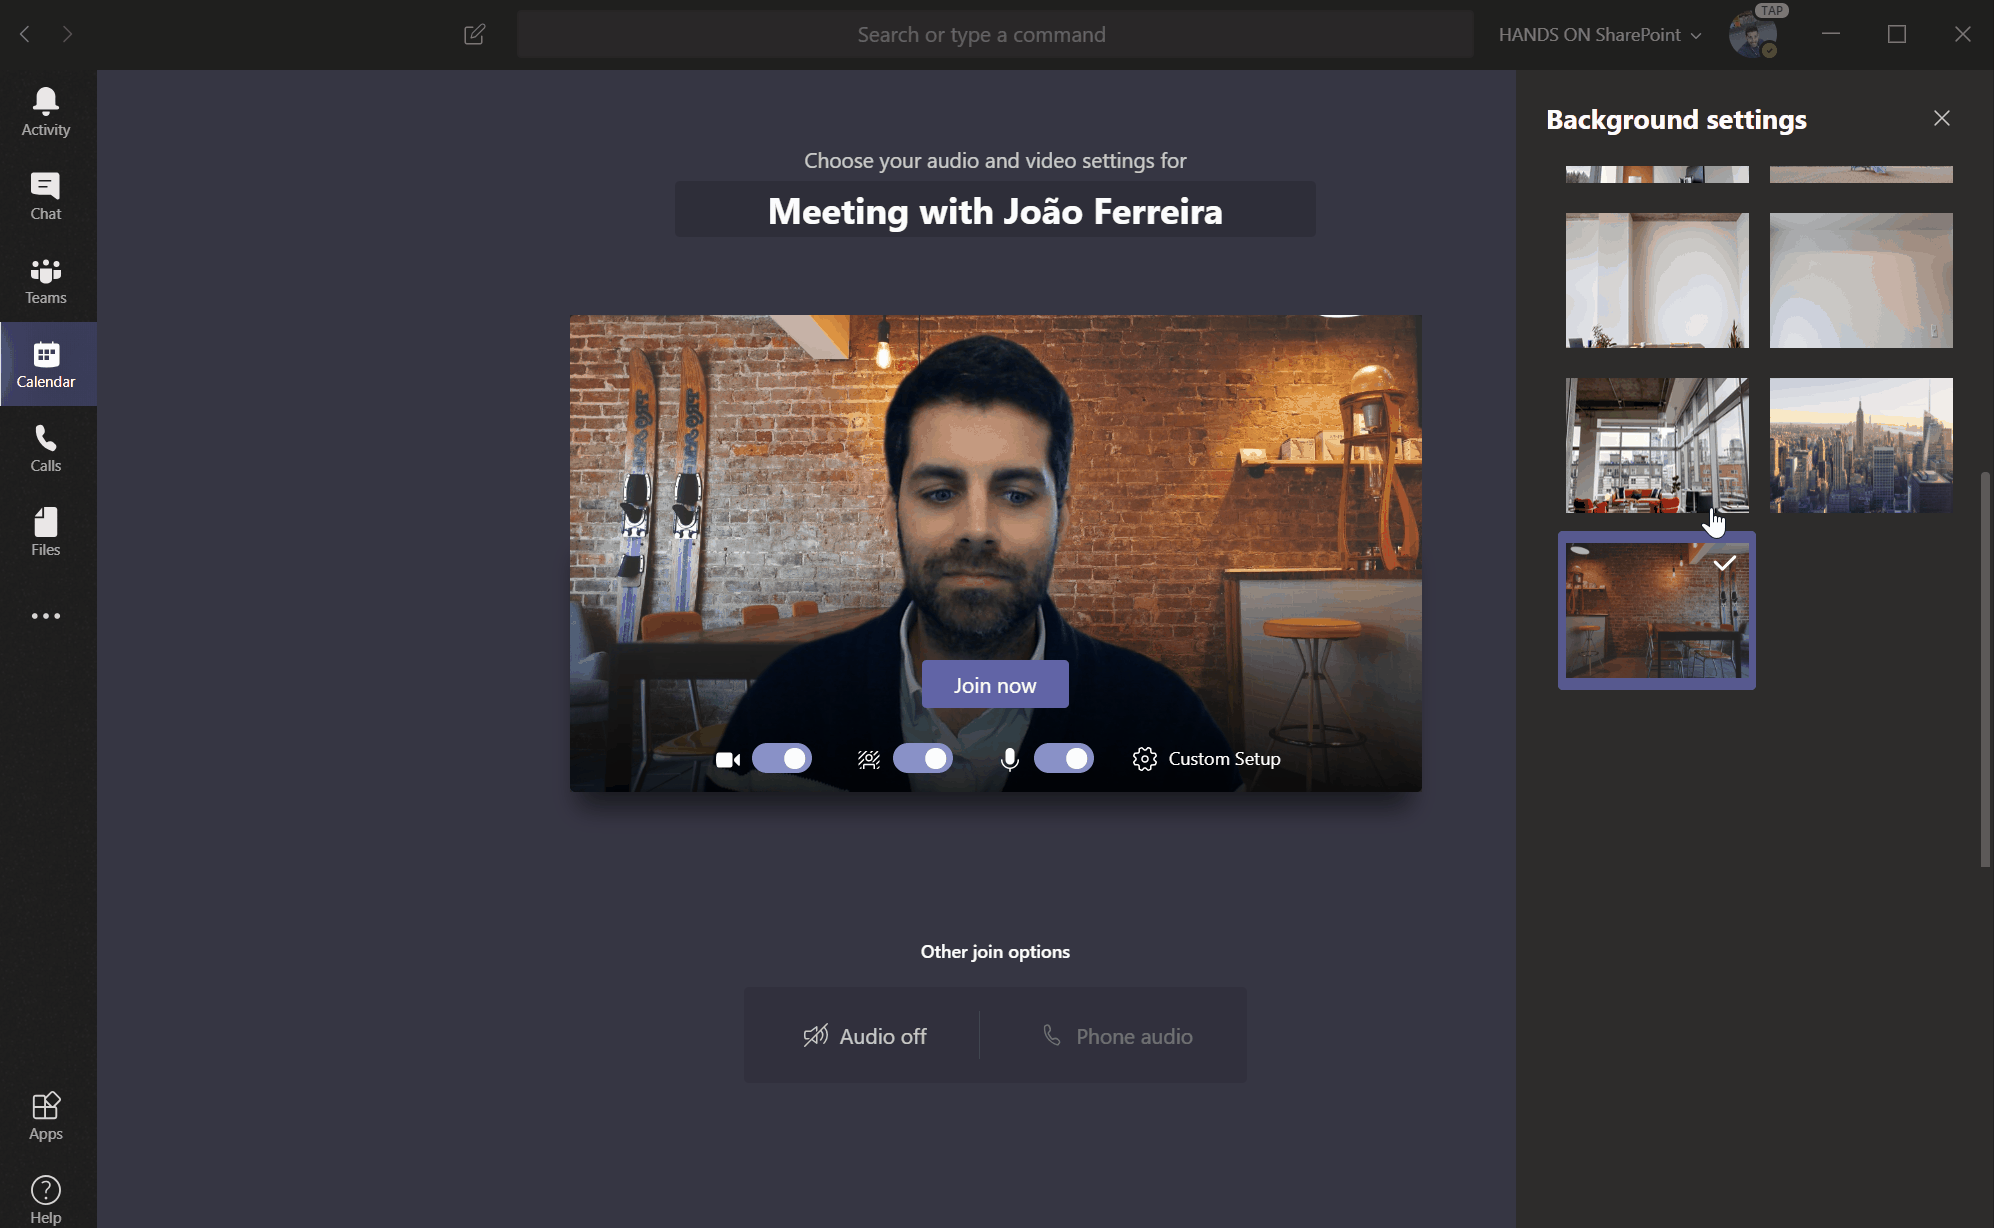 How to use background images during a Teams meeting - HANDS ON Teams